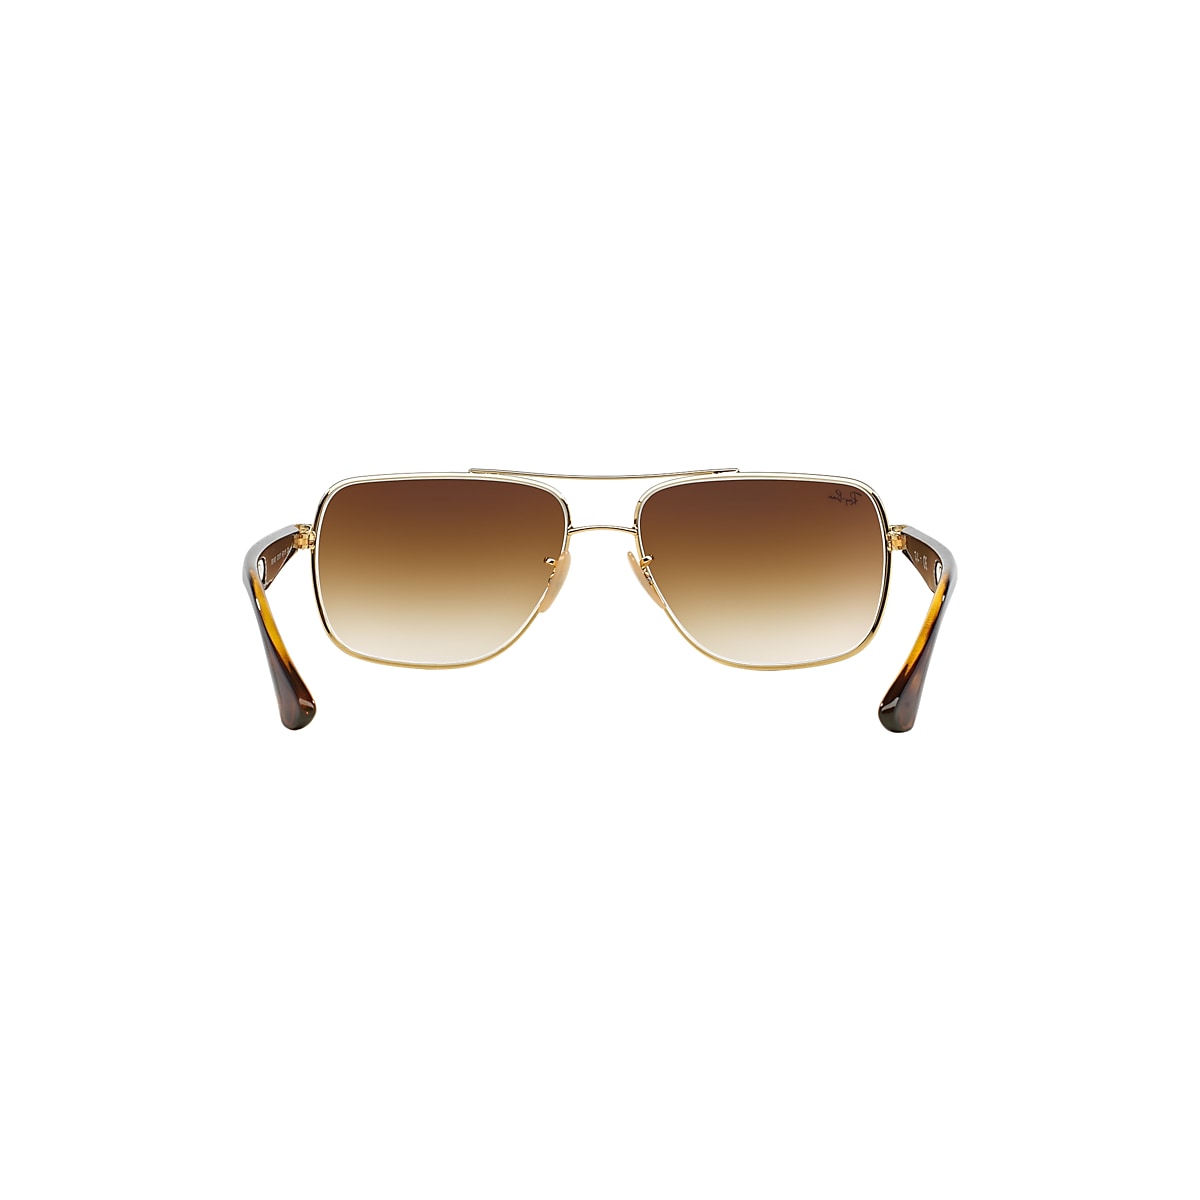 Rb3483 Sunglasses in Gold and Light Brown | Ray-Ban®